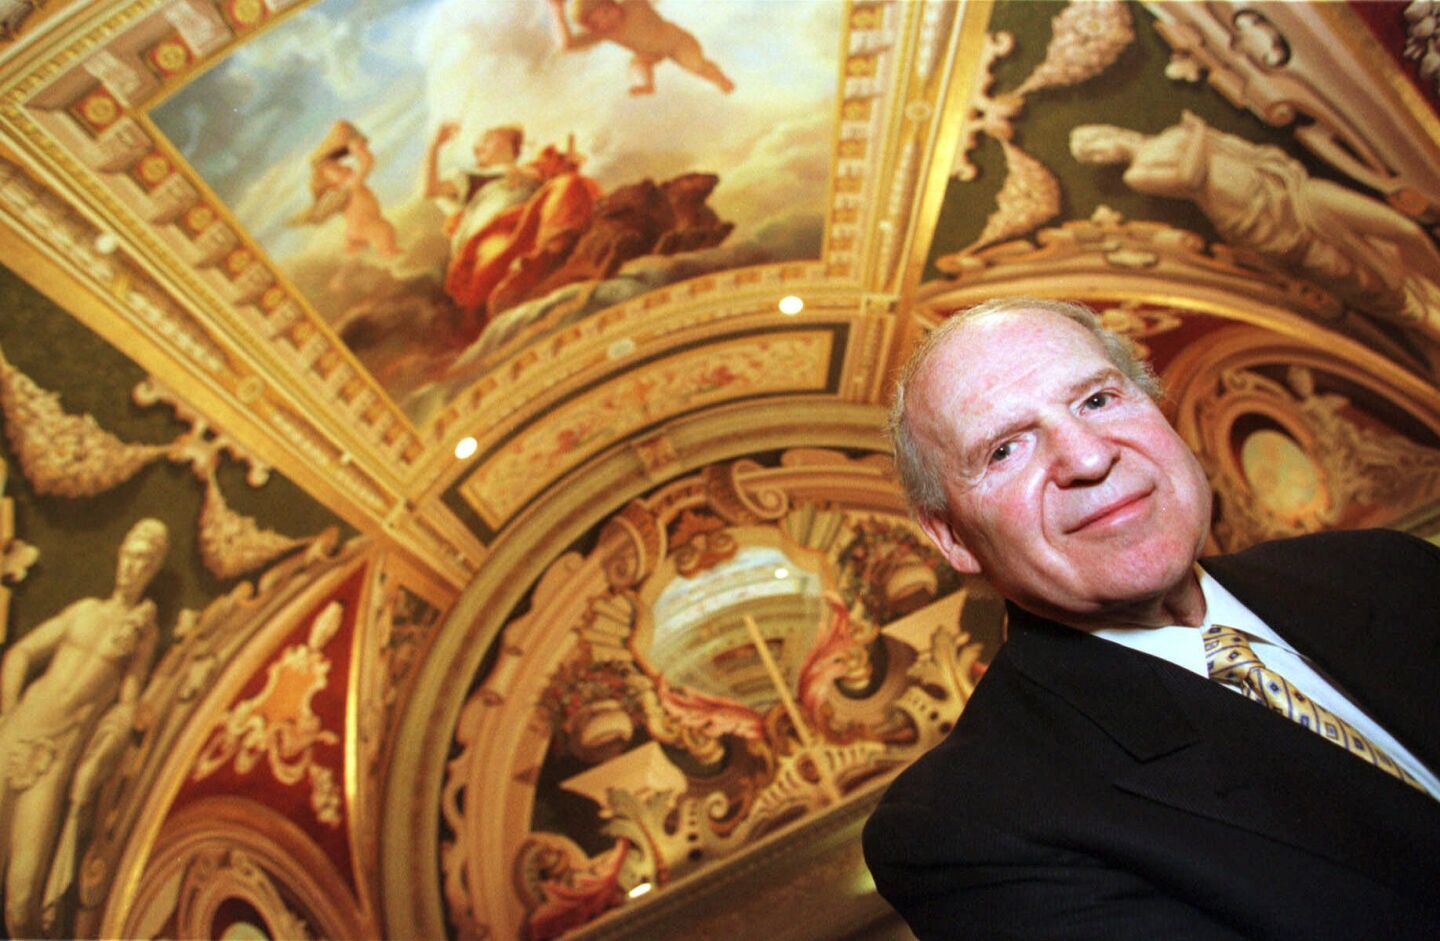 Sheldon Adelson stands beneath elaborate, gilded artwork on a ceiling.